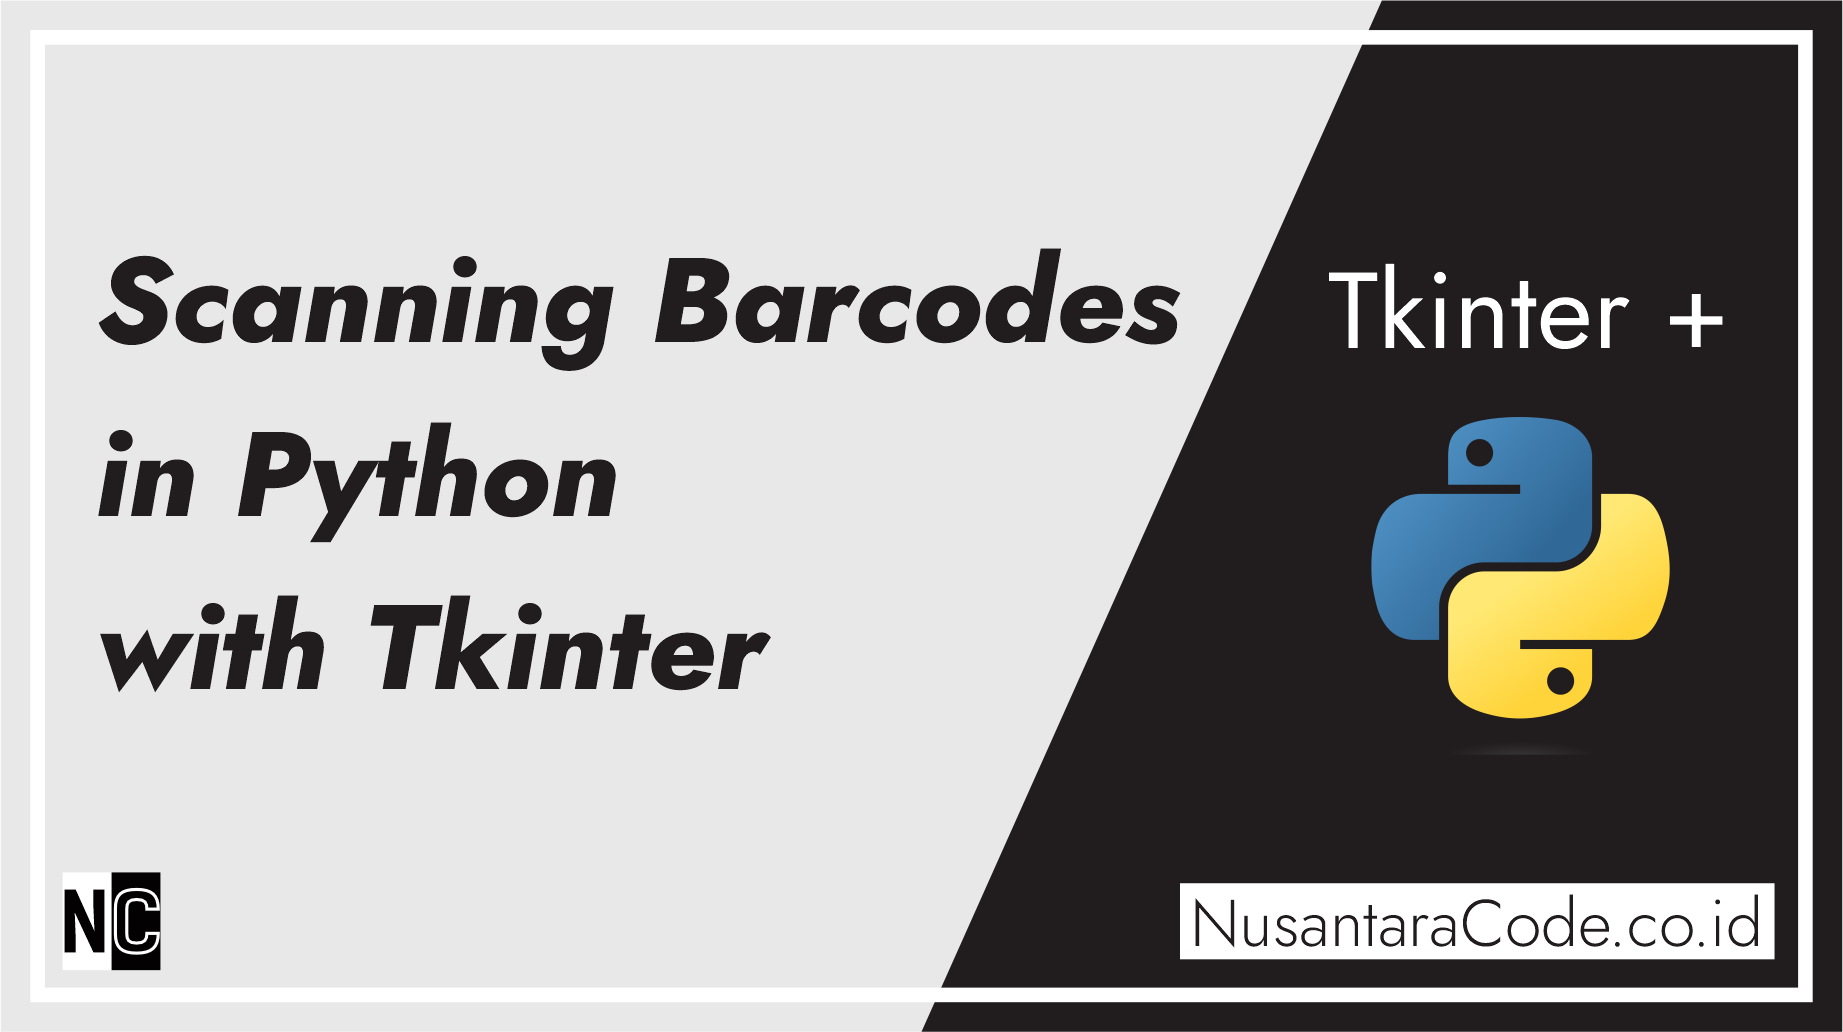 Scanning Barcodes in Python with Tkinter